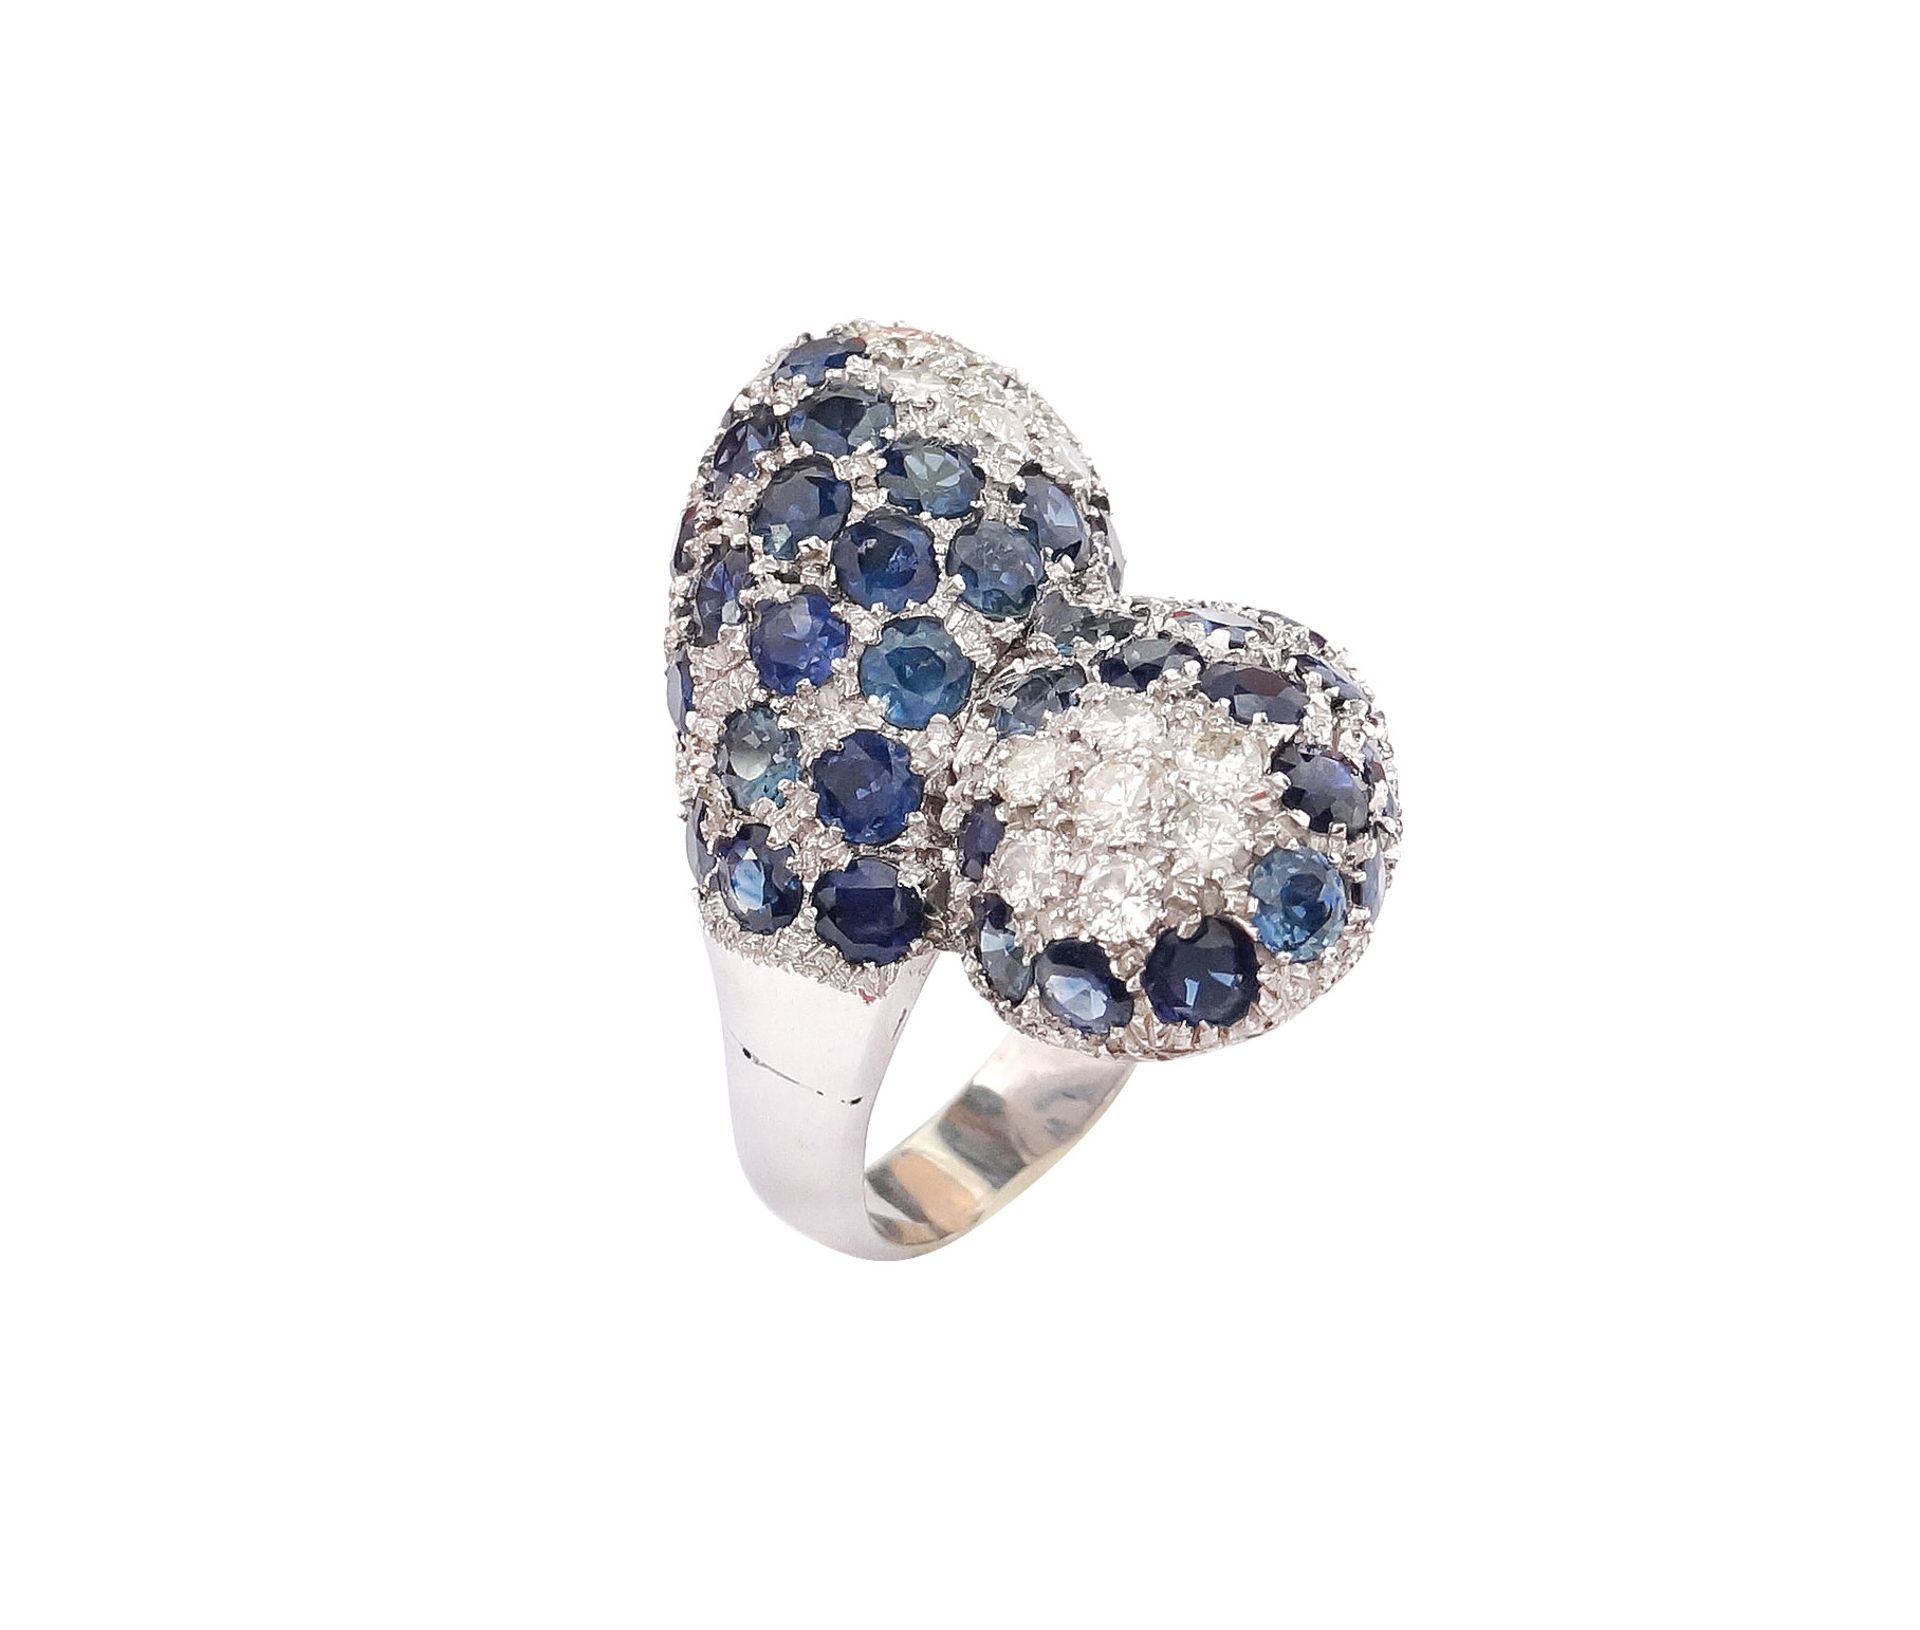 An 18k white gold, sapphire and diamond contrarie ring